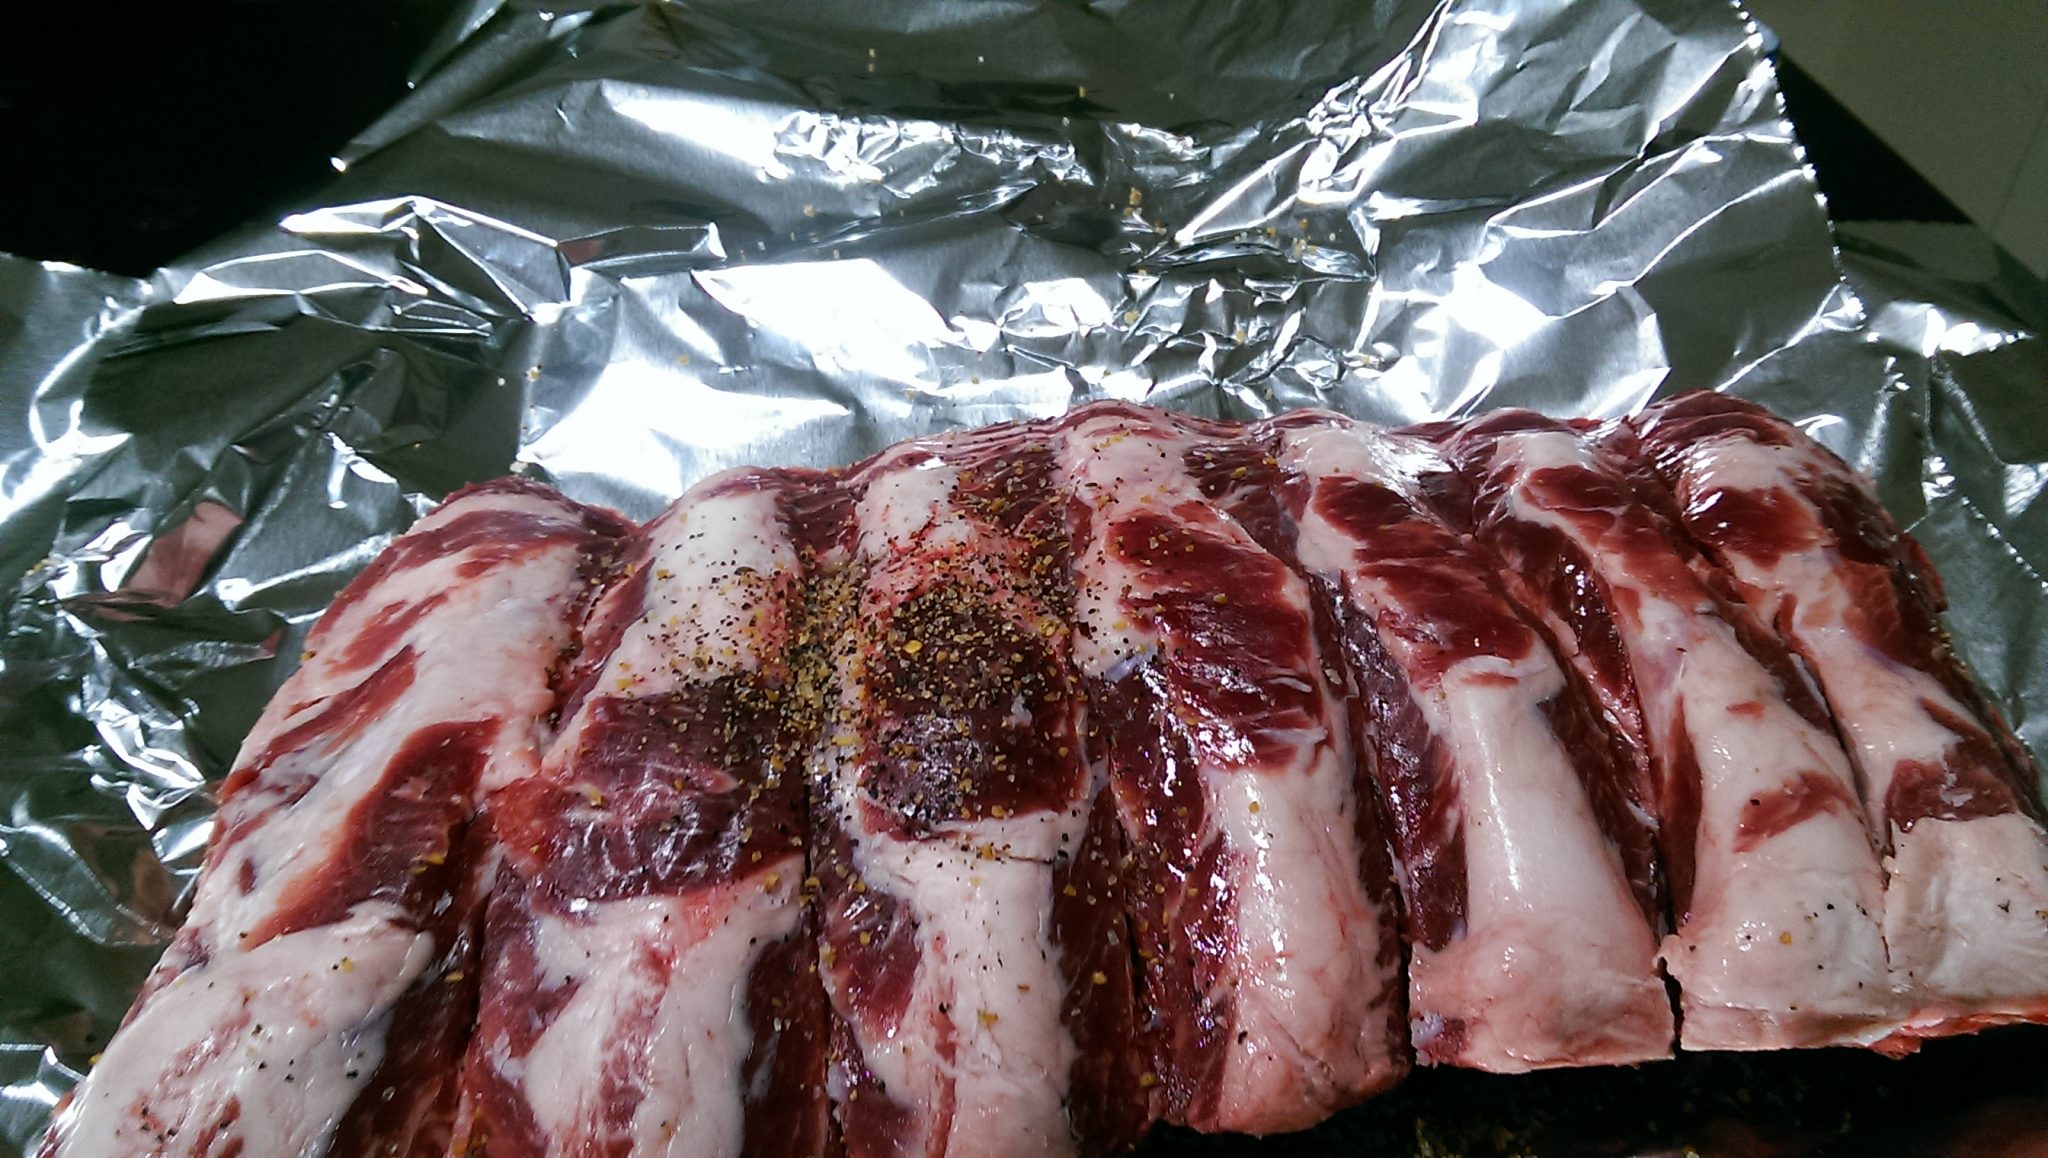 Foil-Wrapped Ribs, How to Grill Ribs in Foil